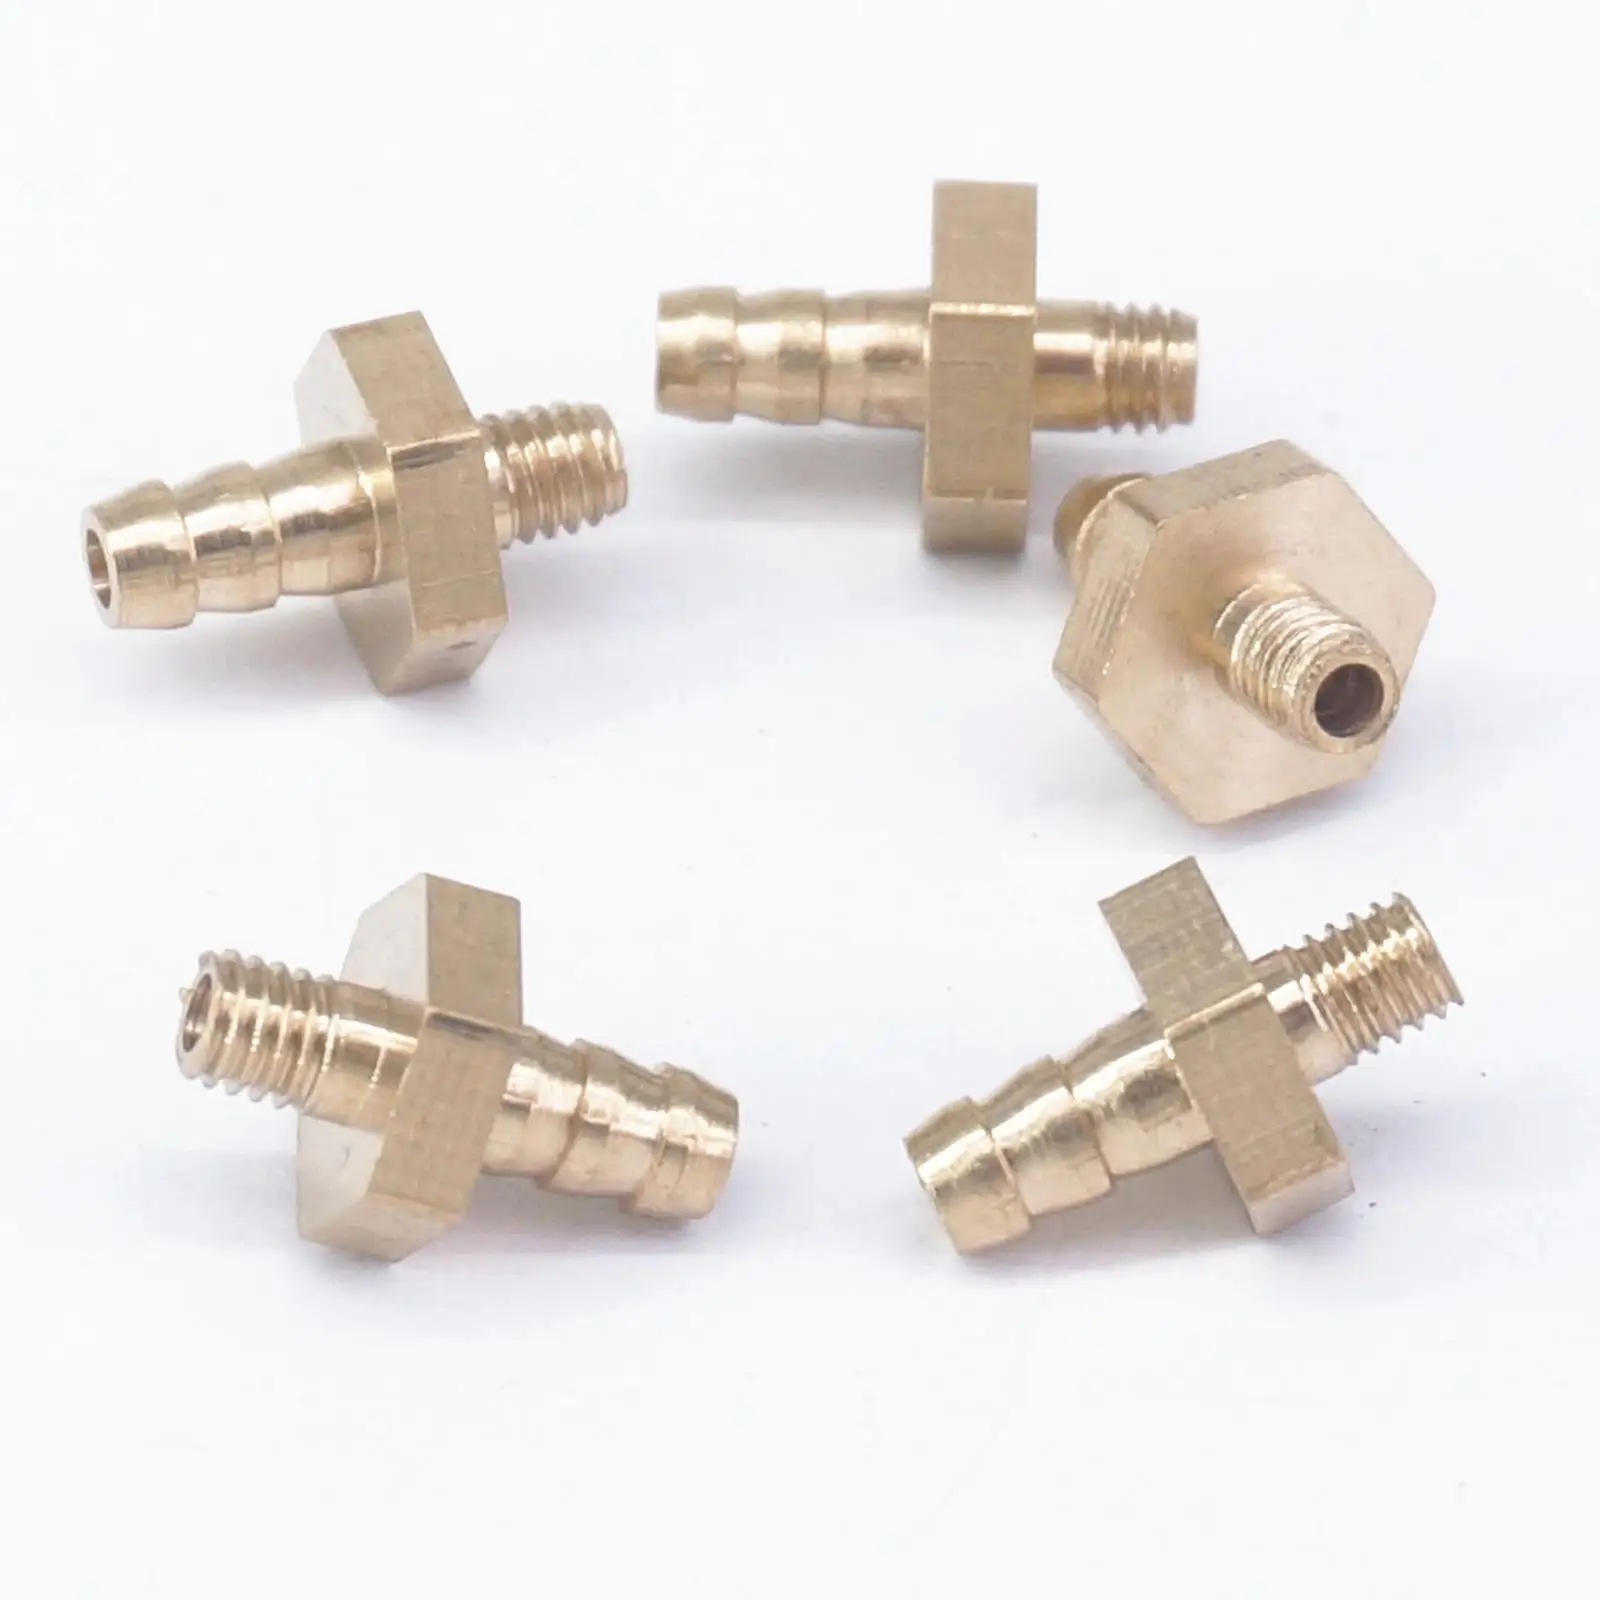 

LOT 5 Hose Barb I/D 3mm x M3 Metric Male Thread Brass coupler Splicer Connector fitting for Fuel Gas Water Plumbing